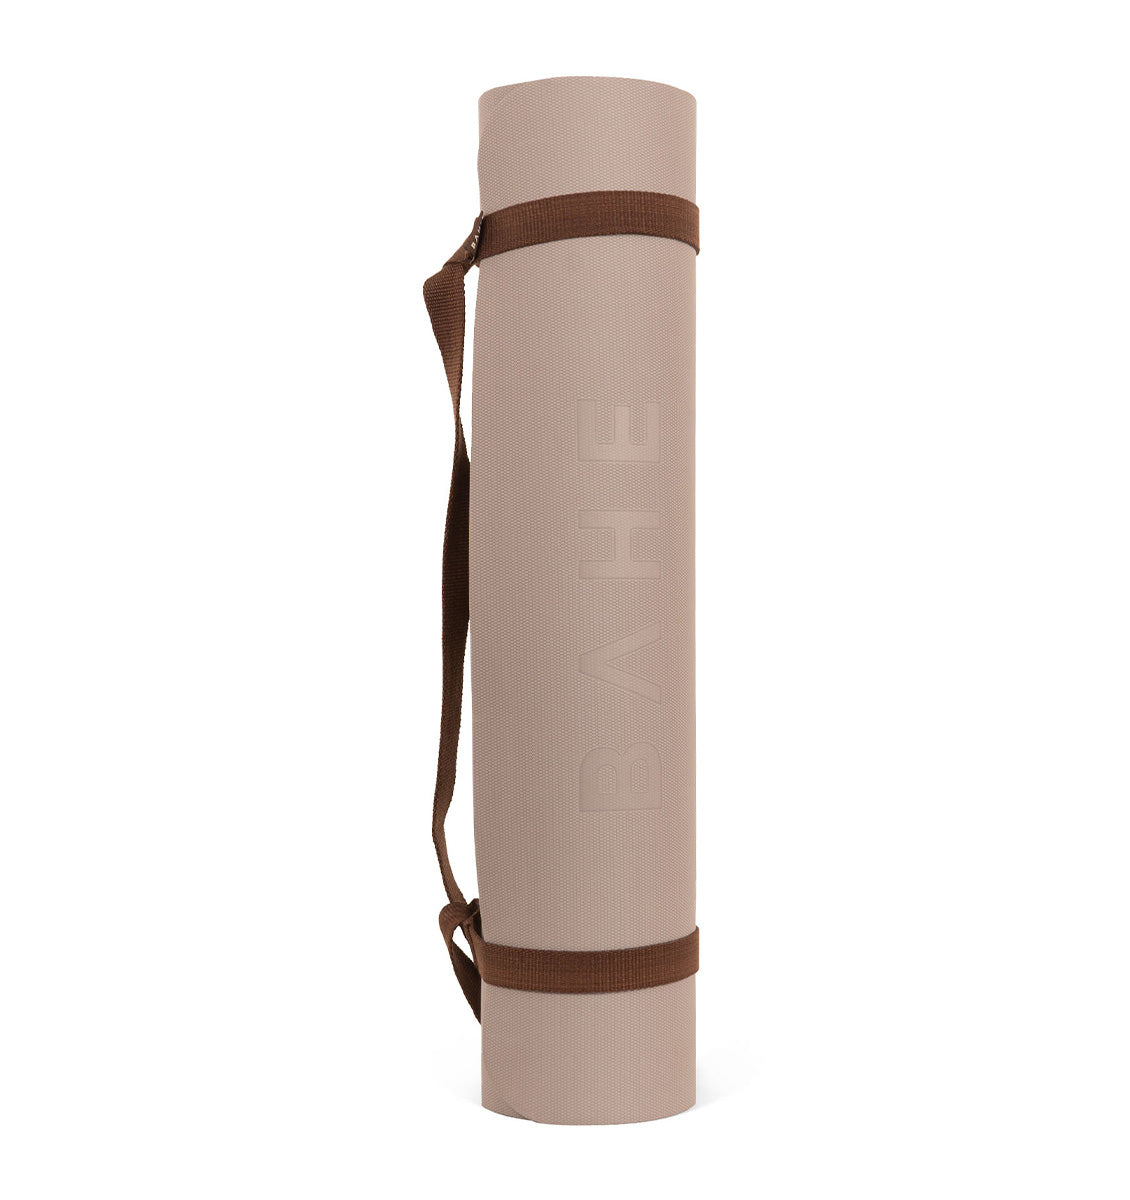 BAHE Soft Touch Reversible XL Yoga Mat - 6mm - Clay - 1